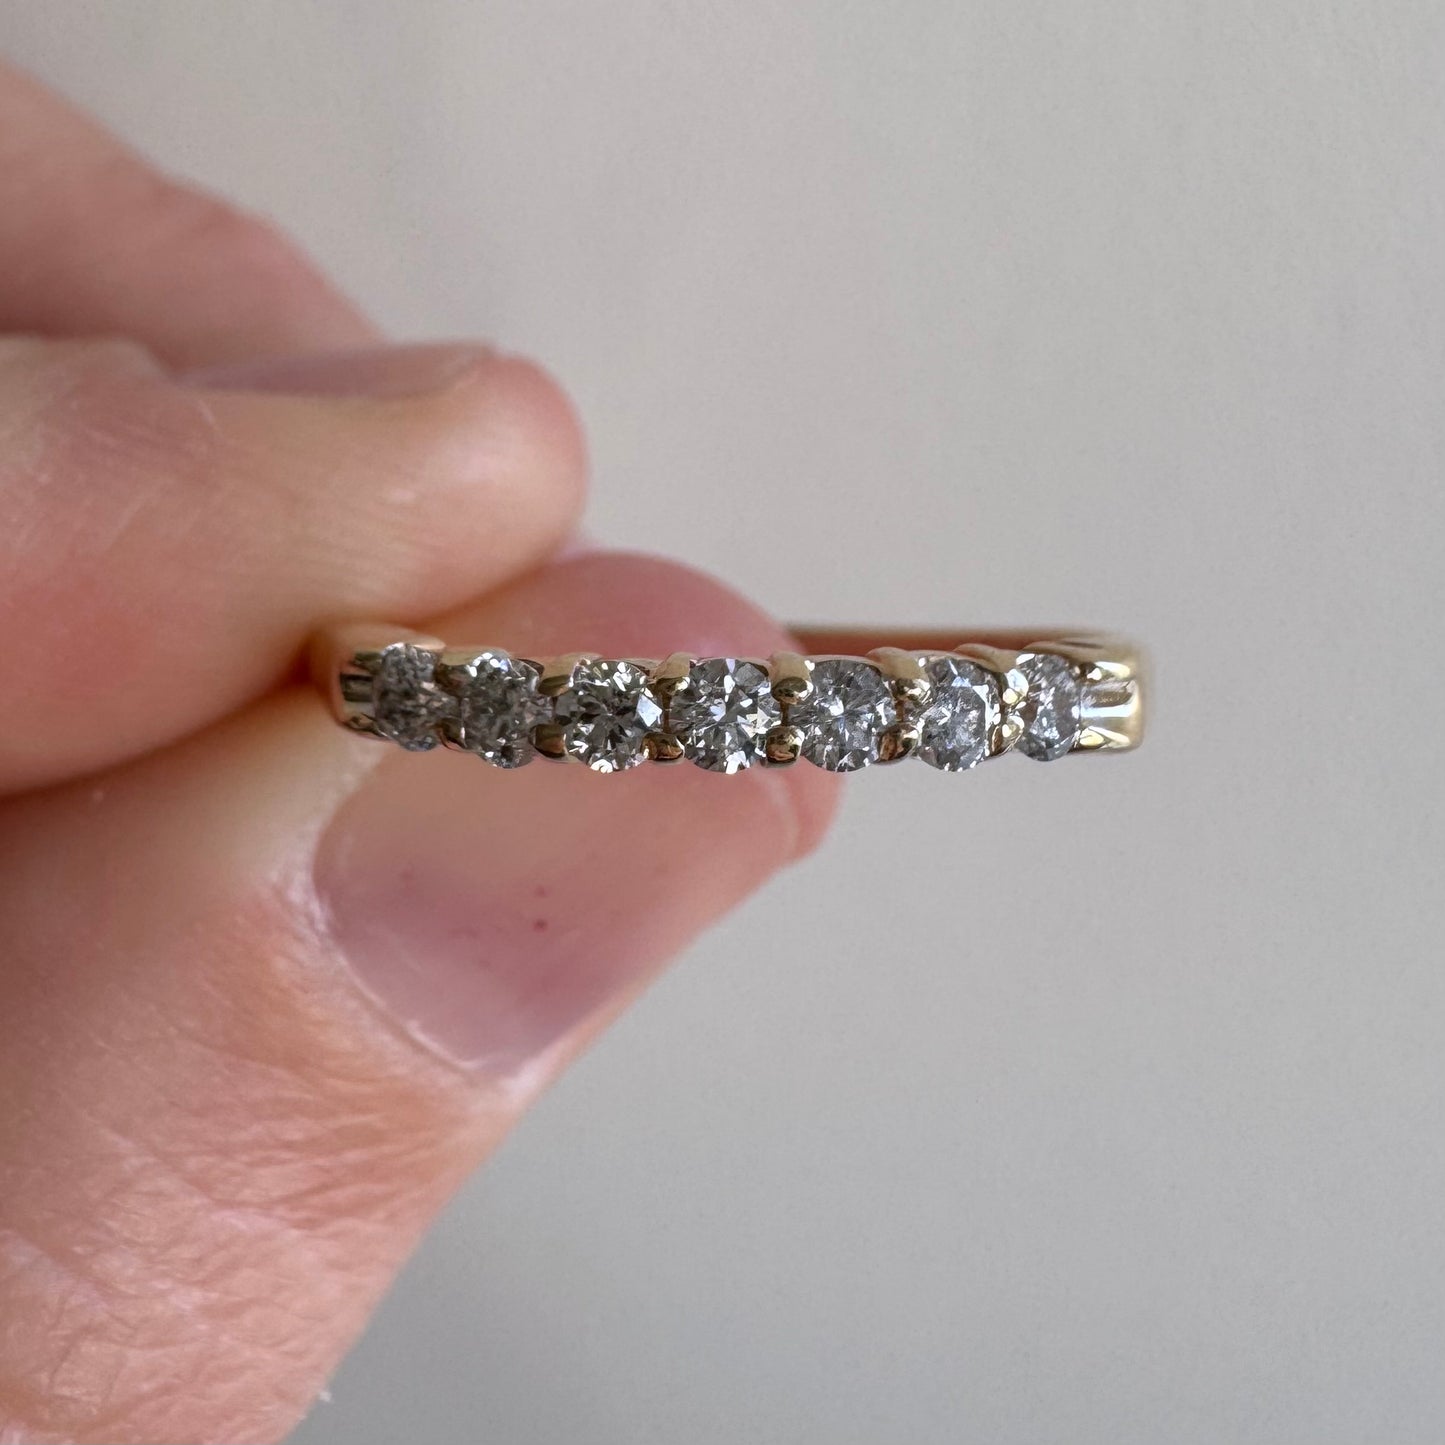 P R E - L O V E D // seven sparkles / 14k yellow gold diamond half eternity band / size 7.25 to 7.5